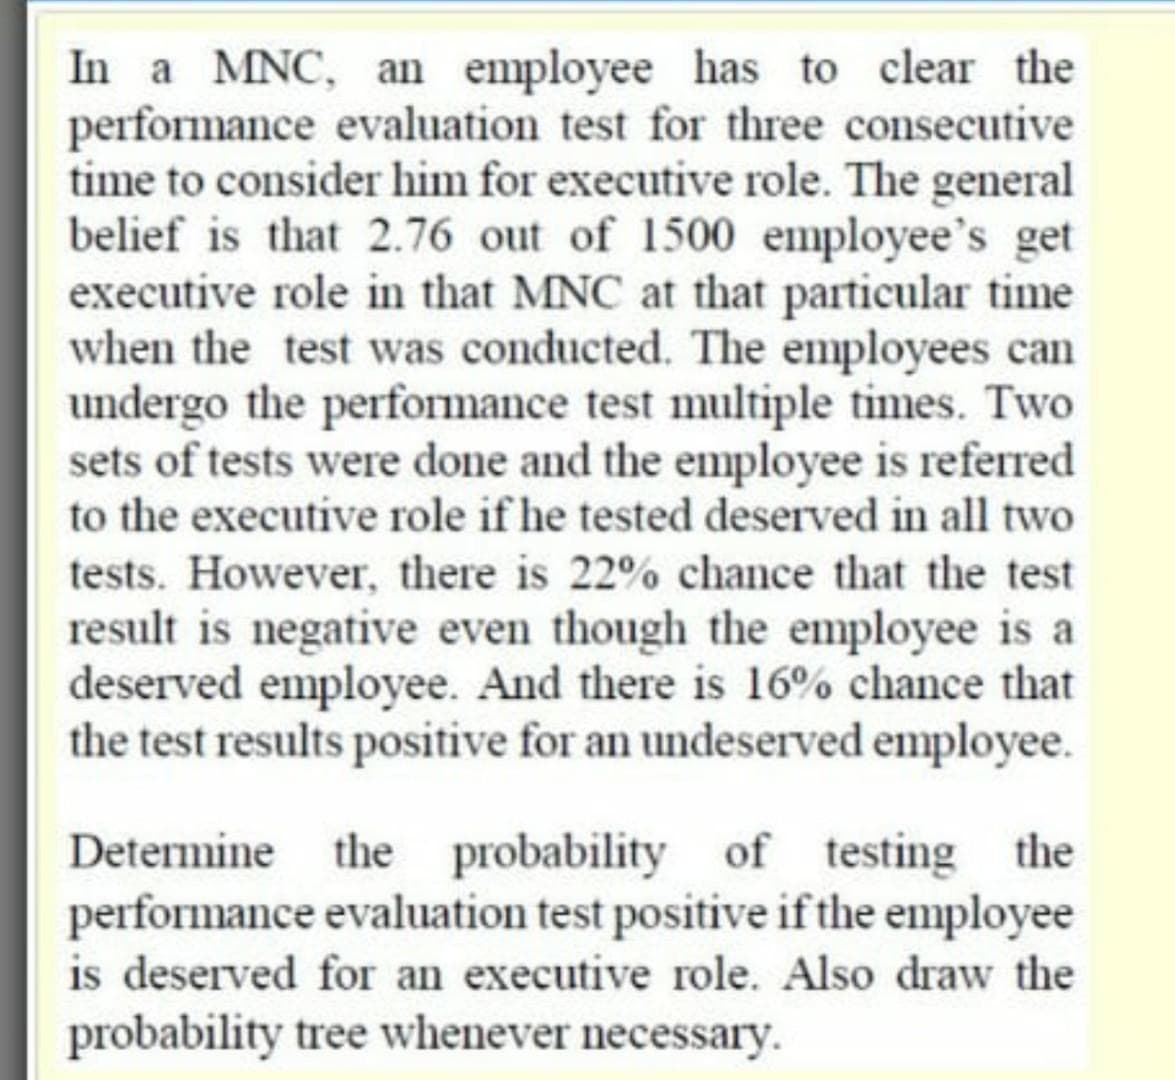 In a MNC, an employee has to clear the
performance evaluation test for three consecutive
time to consider him for executive role. The general
belief is that 2.76 out of 1500 employee's get
executive role in that MNC at that particular time
when the test was conducted. The employees can
undergo the performance test multiple times. Two
sets of tests were done and the employee is referred
to the executive role if he tested deserved in all two
tests. However, there is 22% chance that the test
result is negative even though the employee is a
deserved employee. And there is 16% chance that
the test results positive for an undeserved employee.
Determine the probability of testing the
performance evaluation test positive if the employee
is deserved for an executive role. Also draw the
probability tree whenever necessary.
